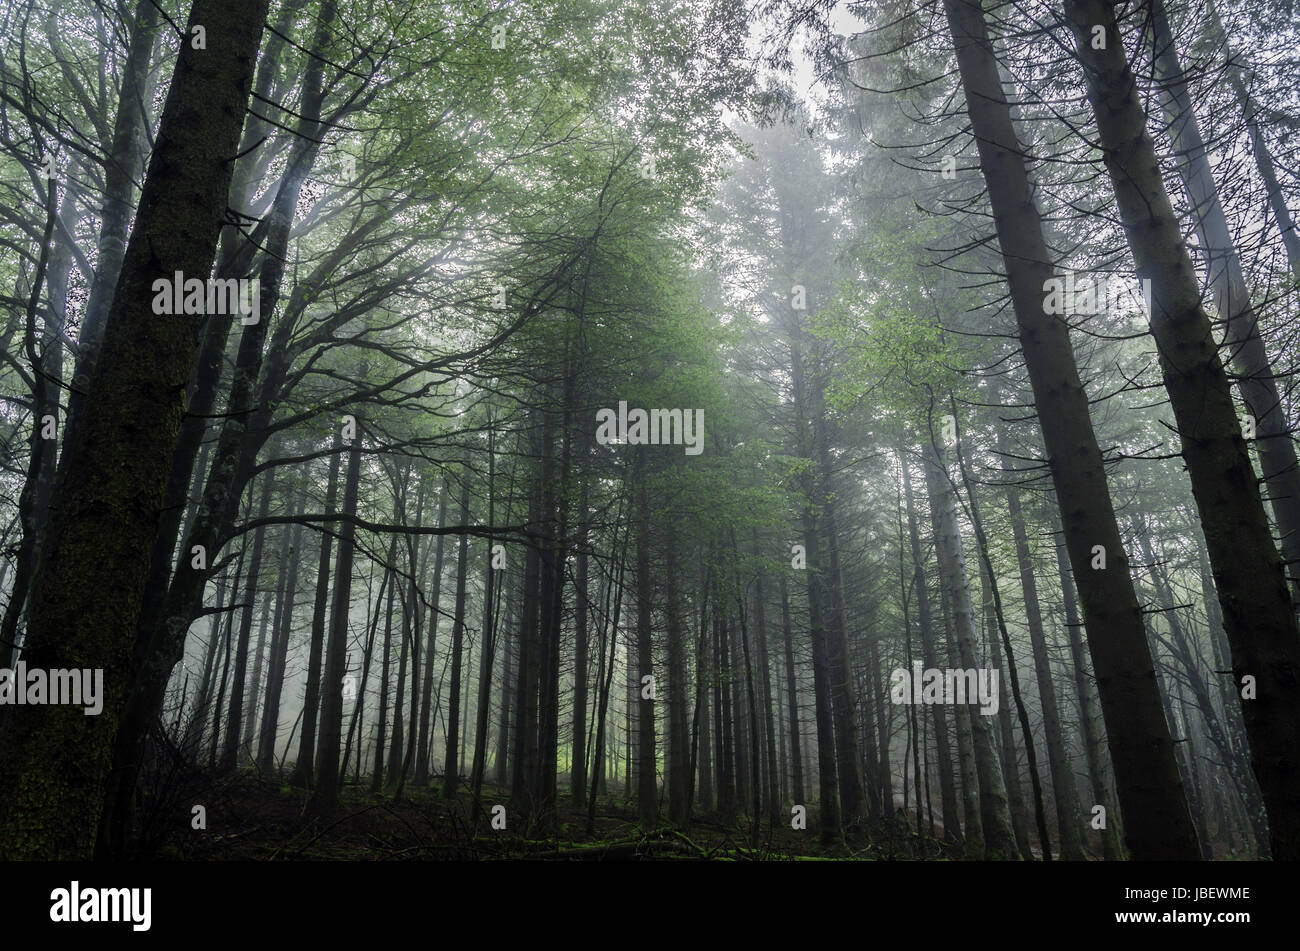 Beautiful nature photography inside the fores in Spain. The fog is adding mysticle atmosphere in this otherwhise boring forest, beautiful sun rays are cutting the fog and make the picture more dramatic. Stock Photo